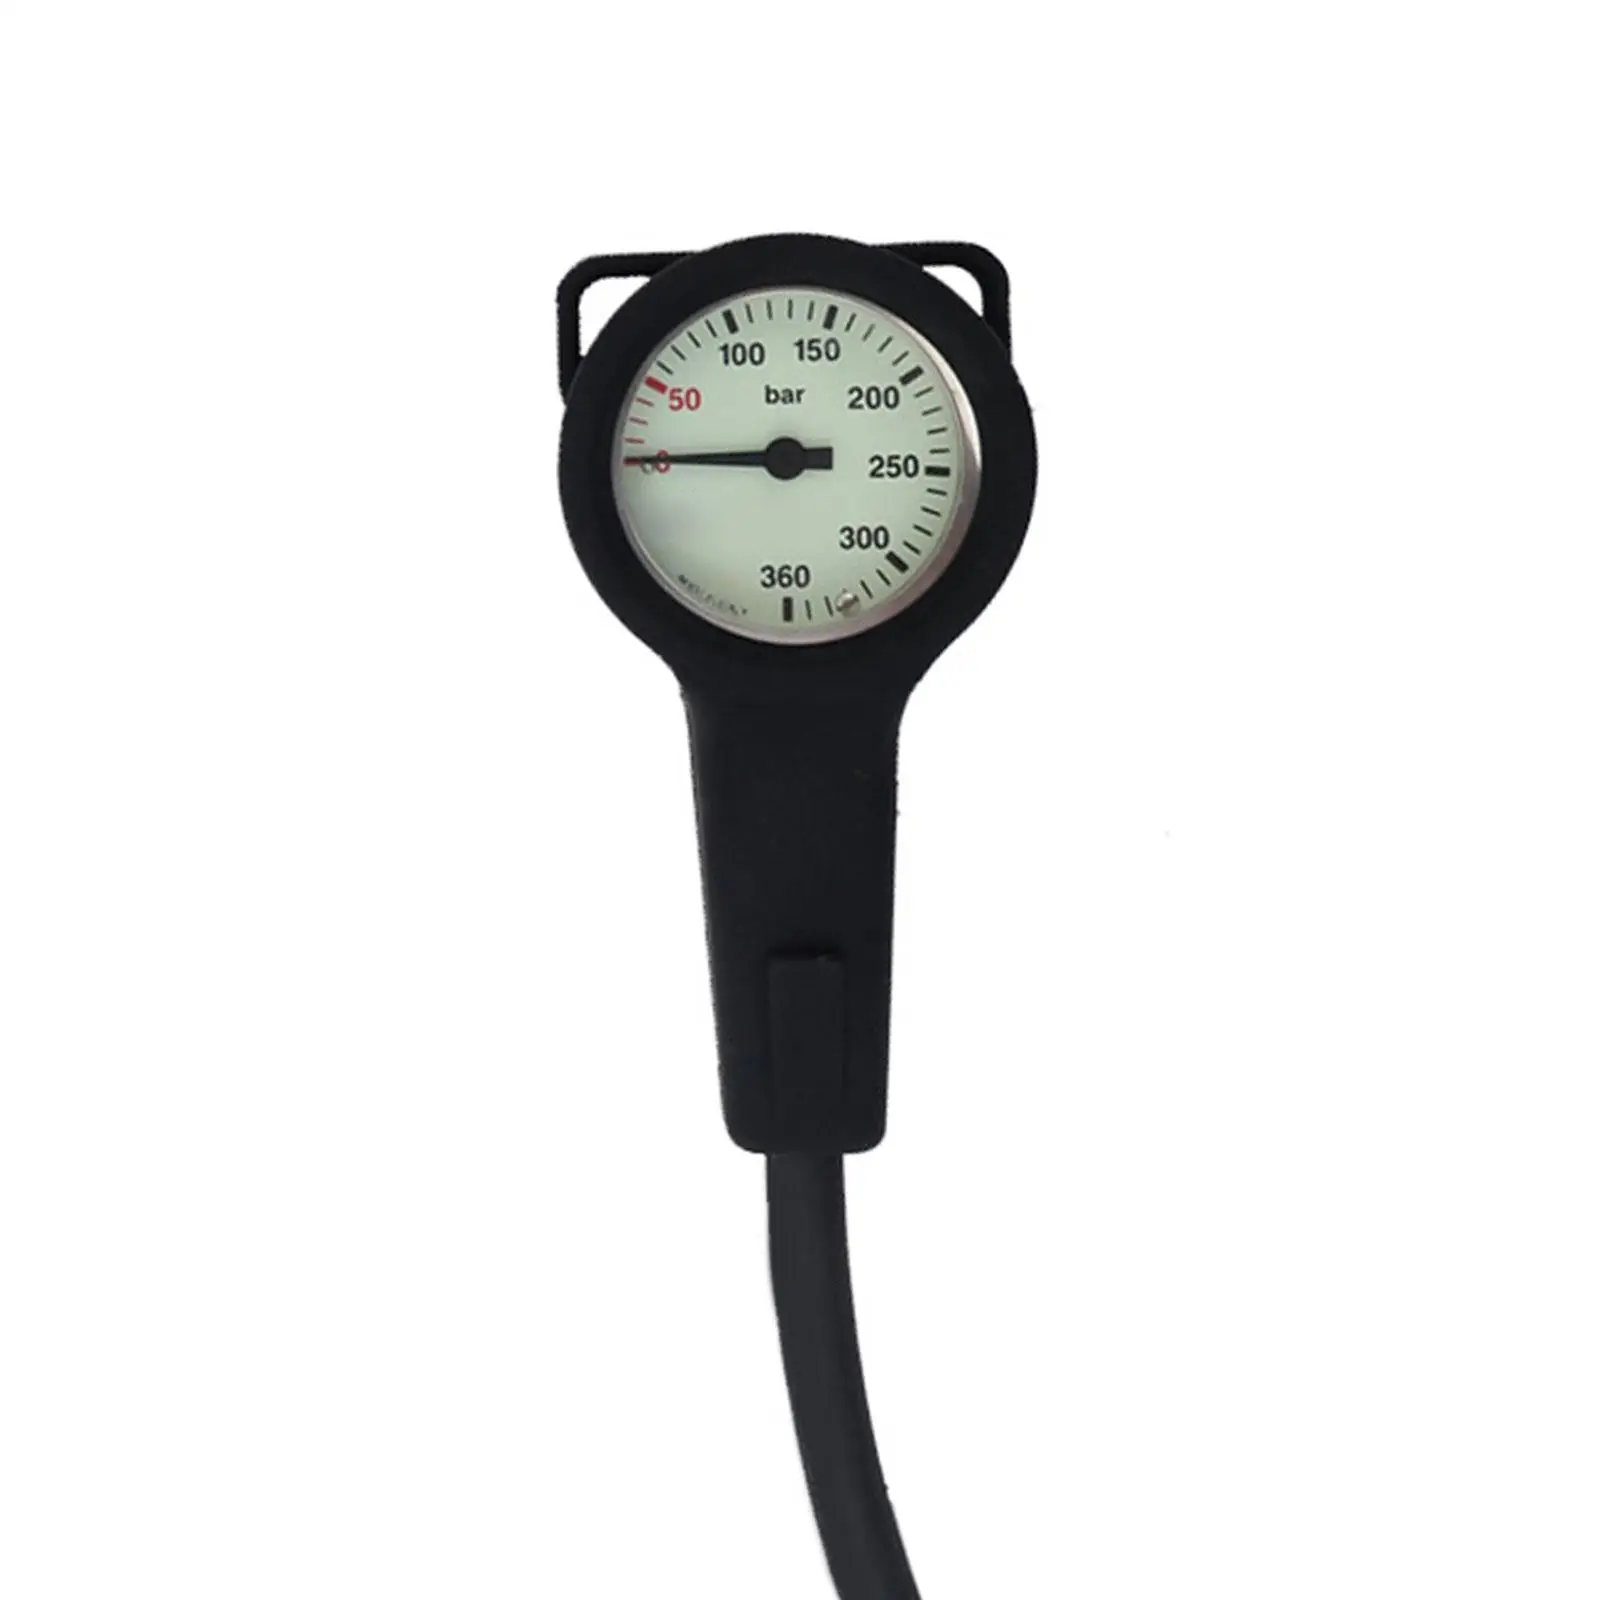 Scuba Pressure Gauge Boot Protector Spg Metal High Pressure Gauge Case Convenient to Use Epdm Environmentally Friendly Rubber